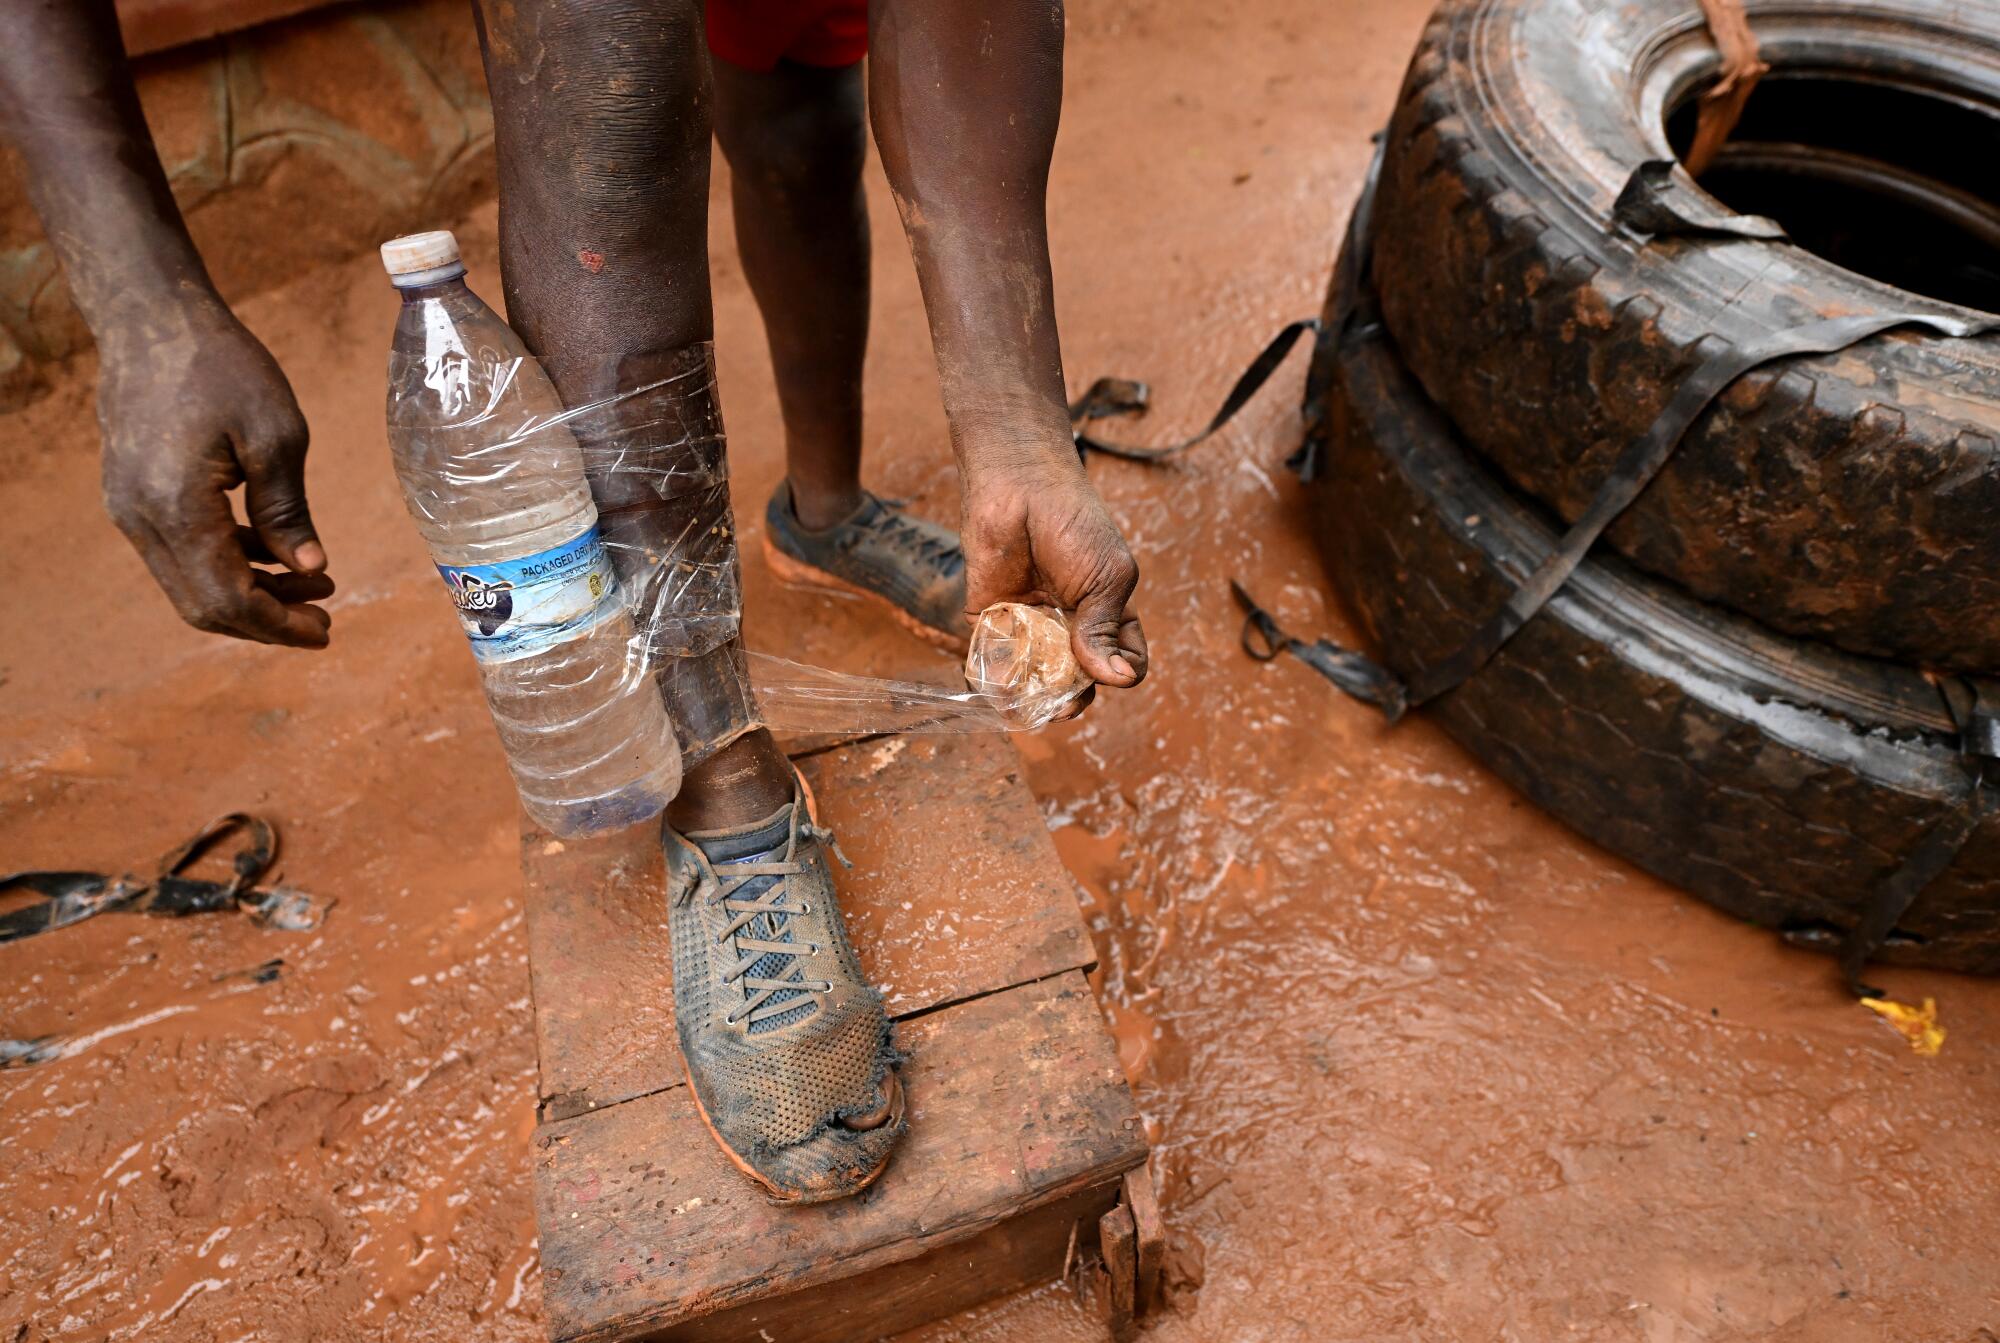 Dennis Kasumba ties a water bottle to his leg during his daily morning workout outside his home.